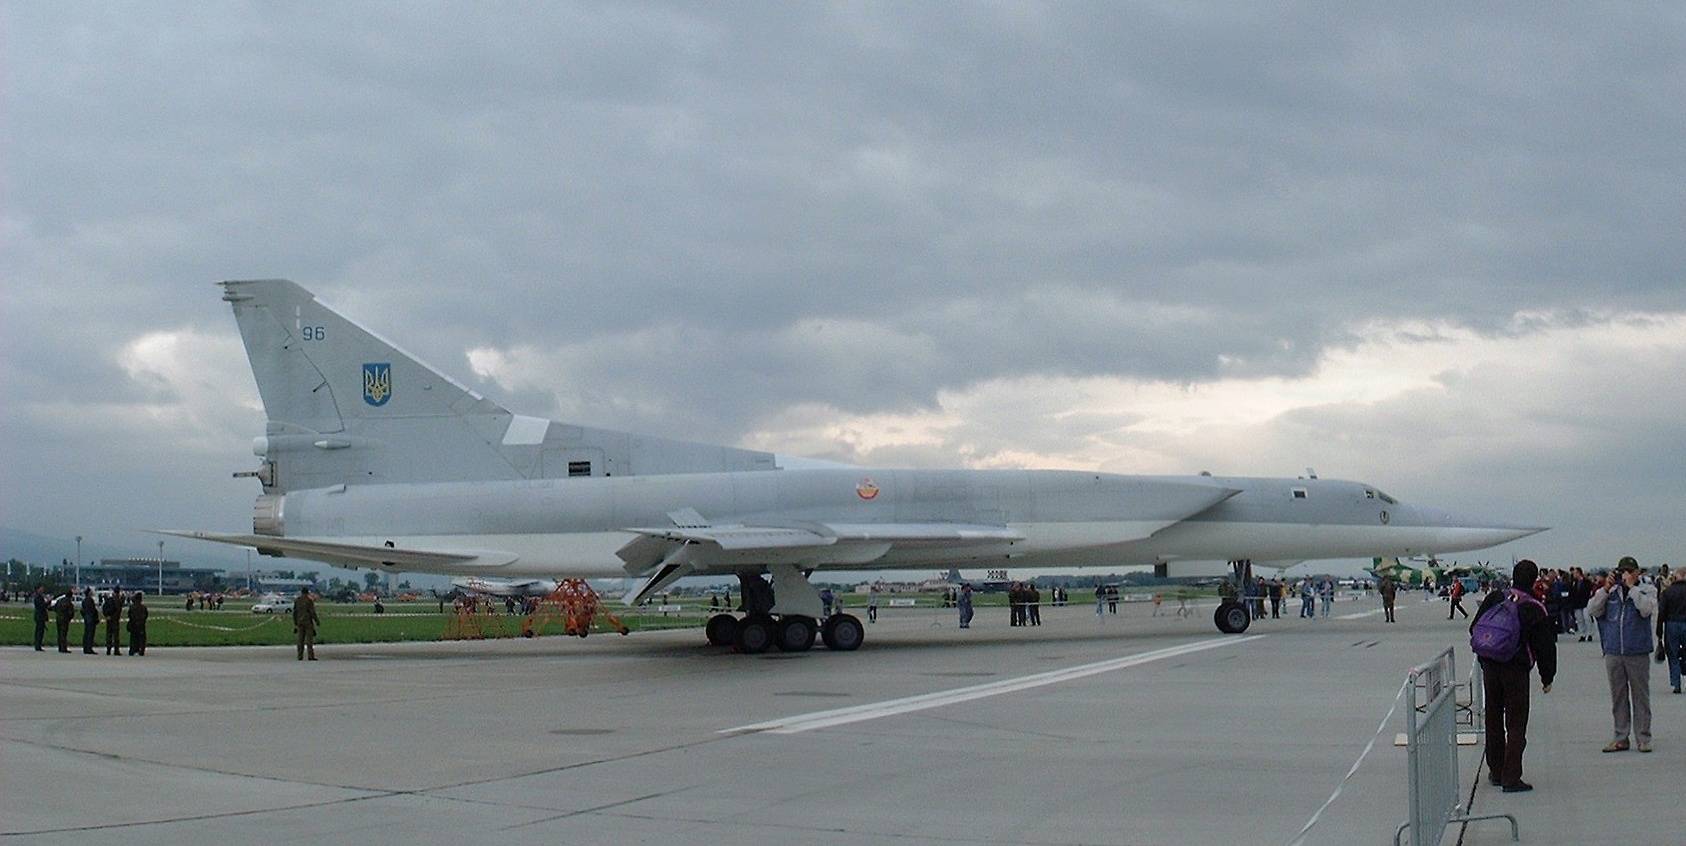 Photos of the Ukrainian Air Force's Tu-22M3 in service